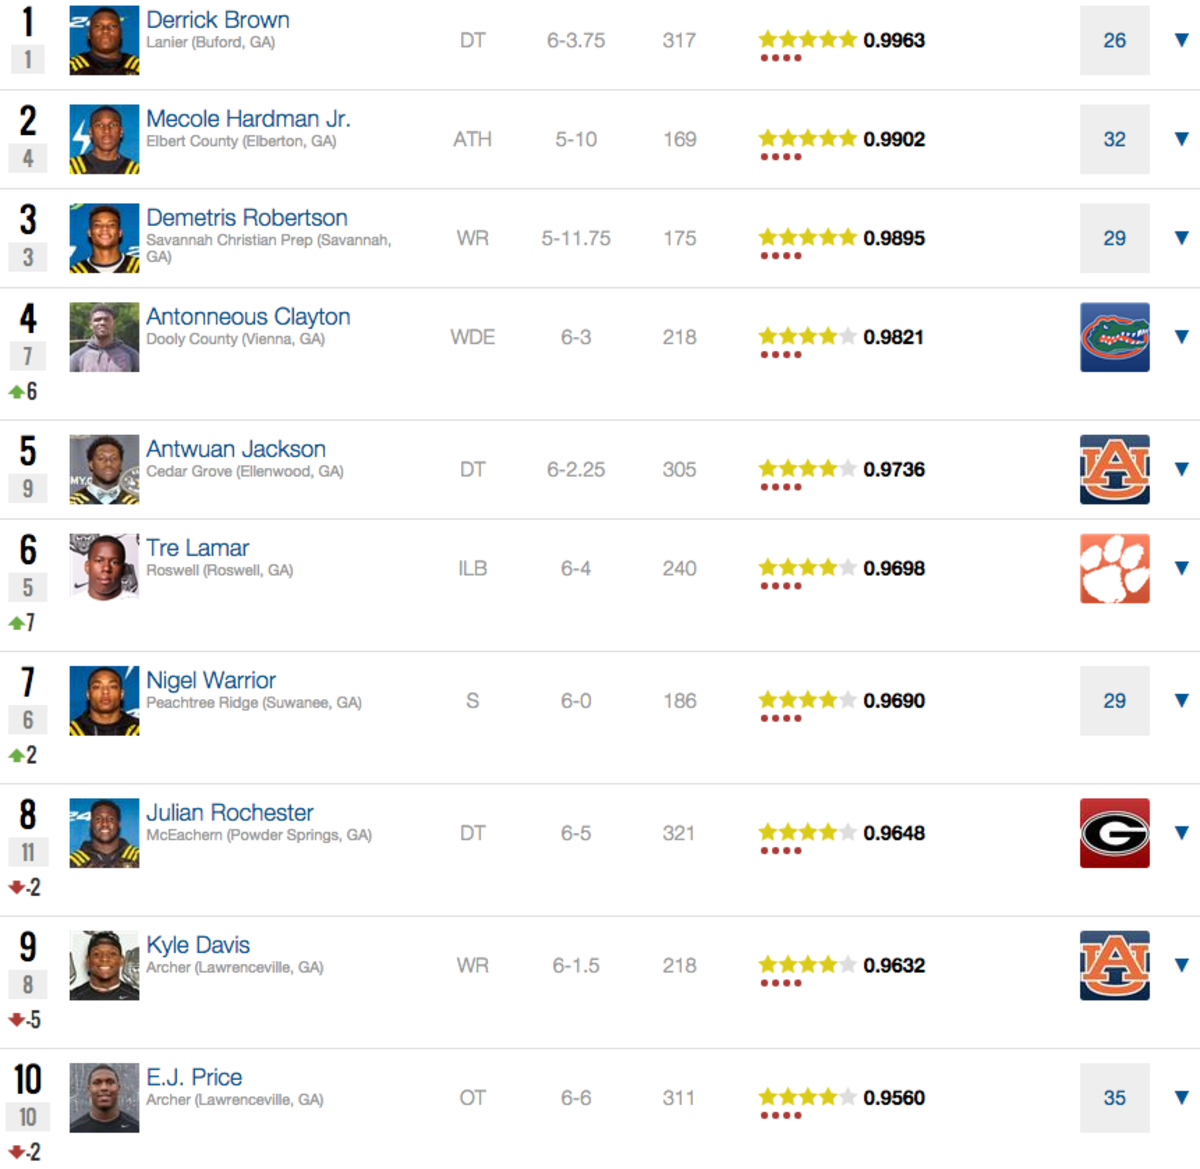 No One Is Better At Getting Commitments From Elite InState Recruits